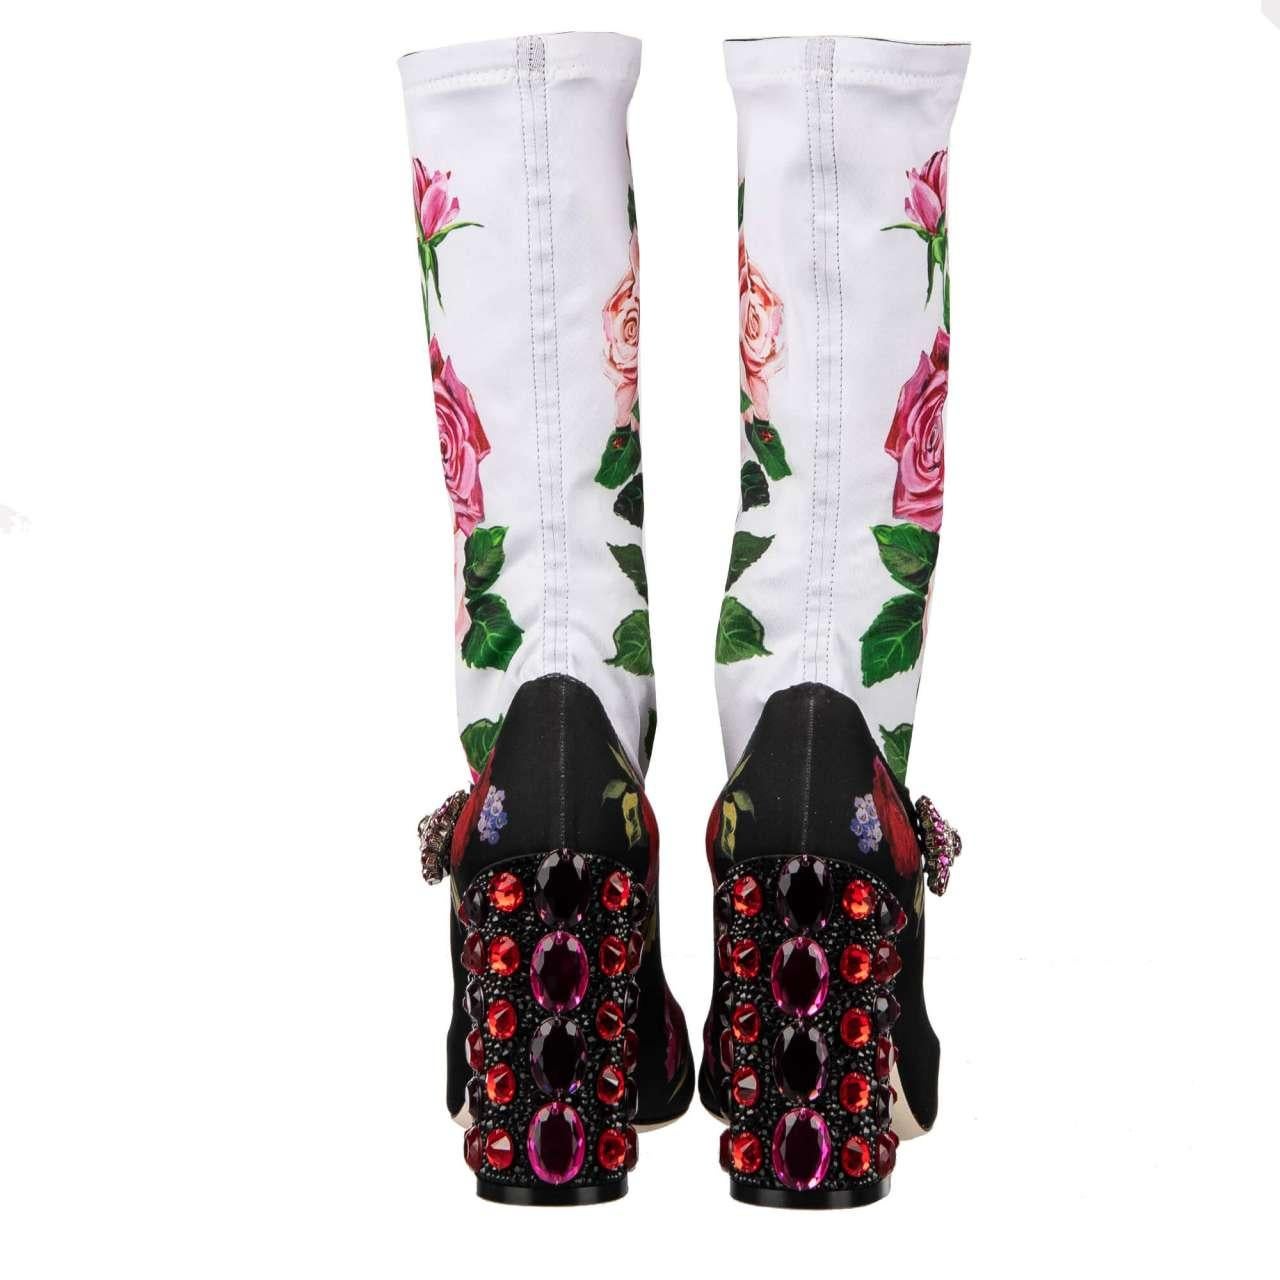 Women's D&G Roses Printed Elastic Socks Pumps VALLY with Crystals Heel Black White 38 For Sale